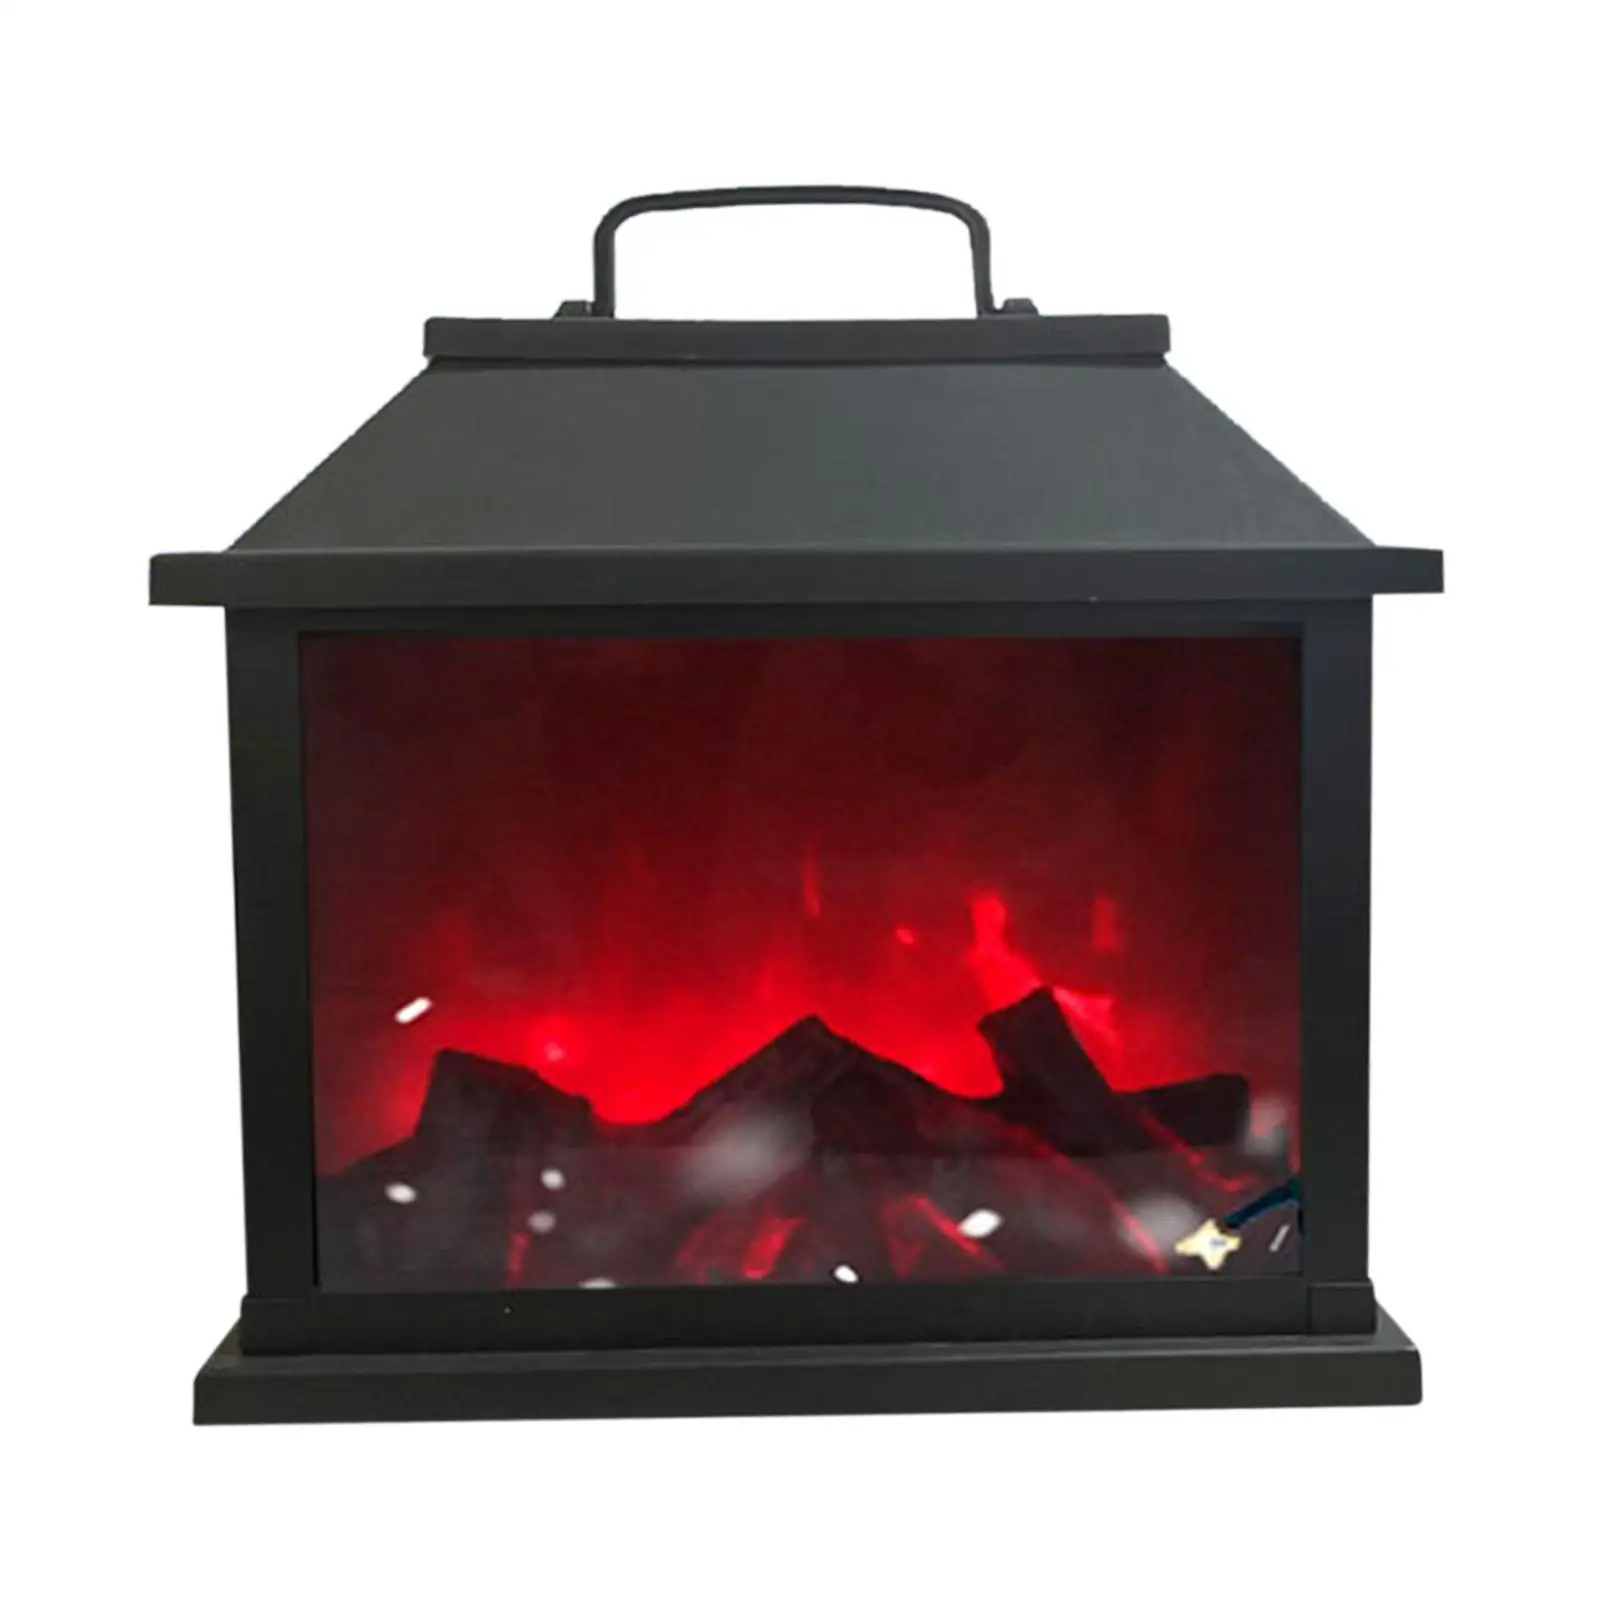 Fireplace Lantern Home Decoration Flame Effect Lighting Fire Lamp Centerpiece Lamp for Christmas Use